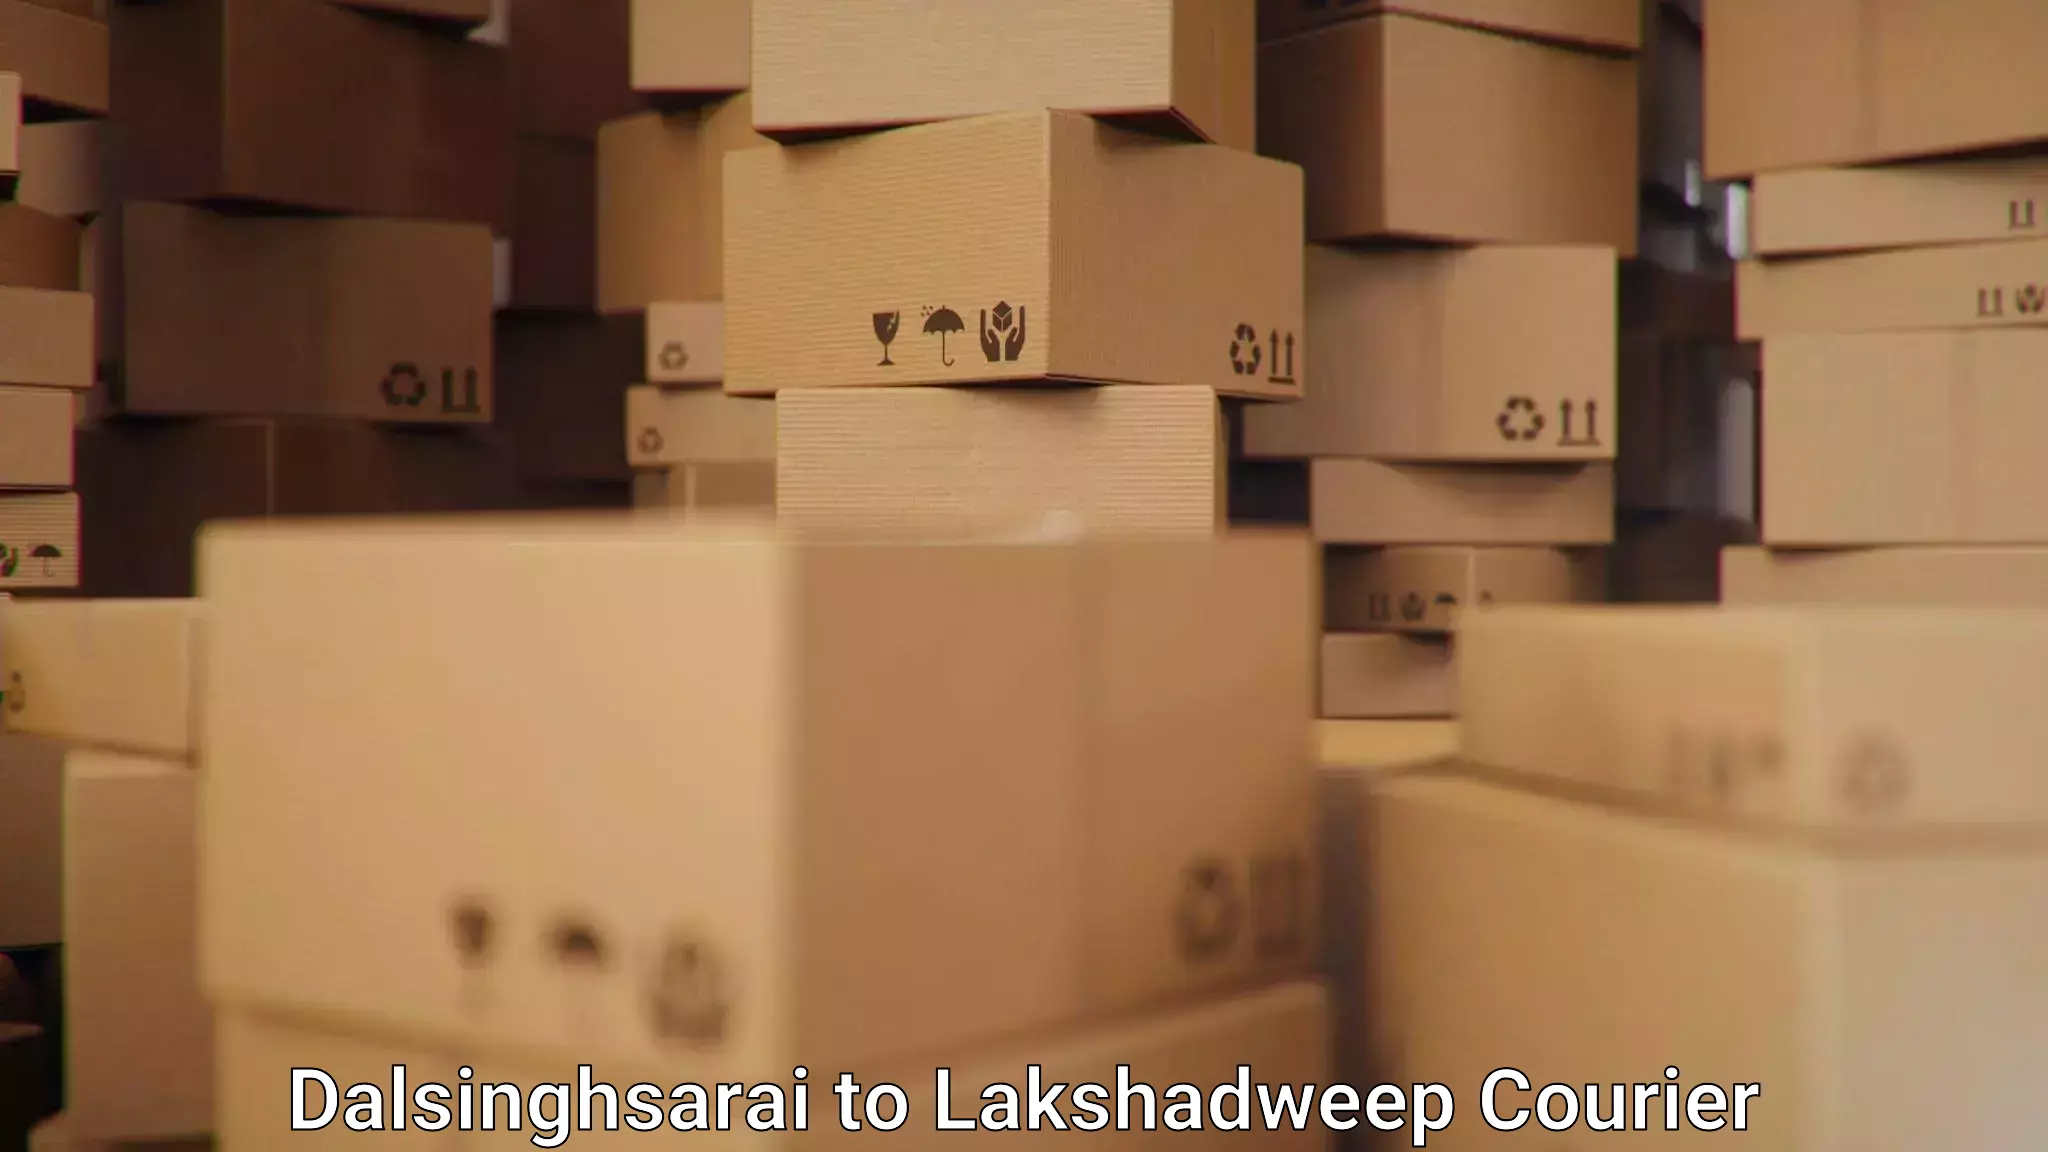 Custom courier solutions Dalsinghsarai to Lakshadweep